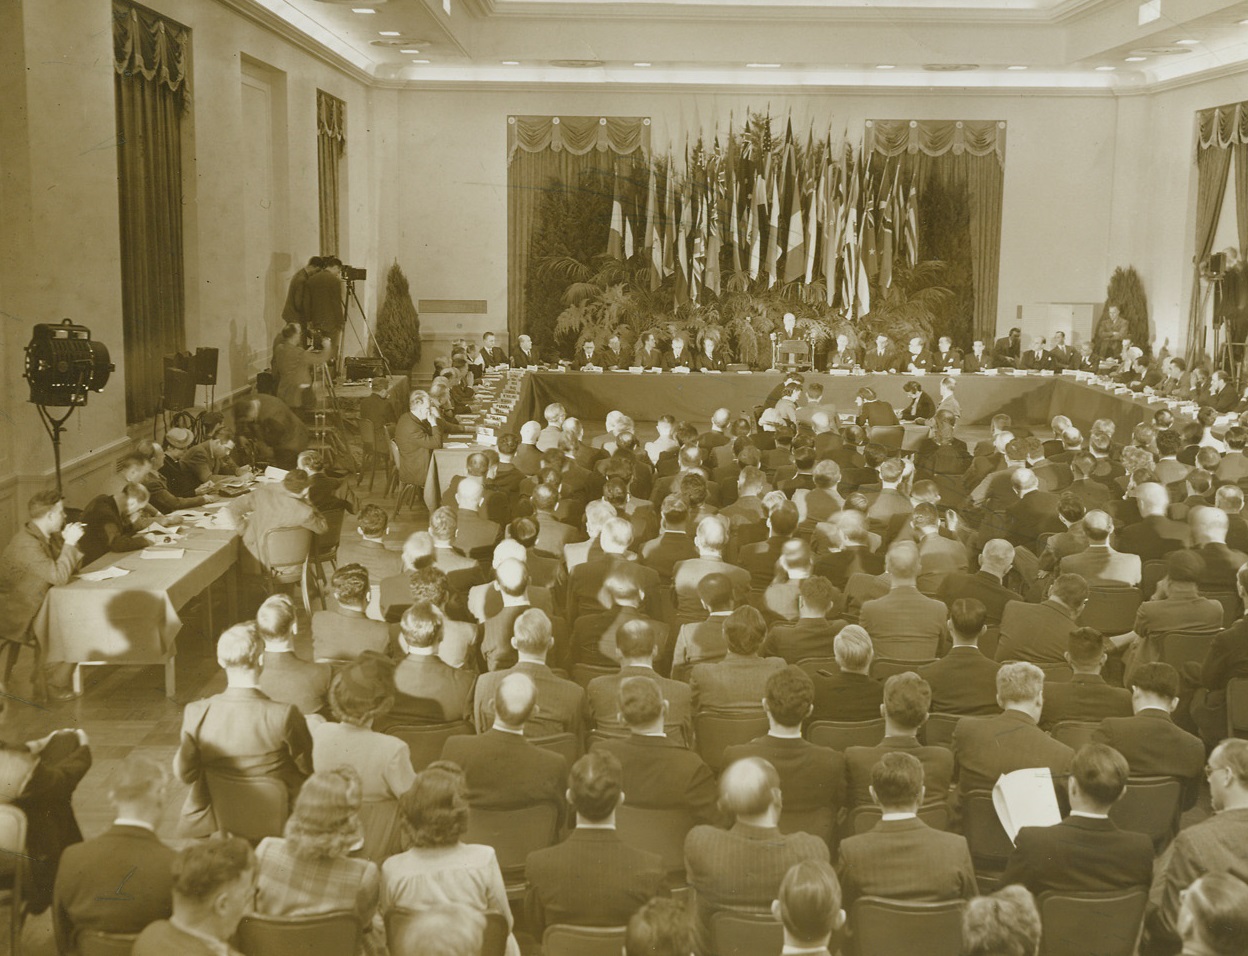 Unanimously Elected, 11/12/1943. ATLANTIC CITY, N.J. - The United Nations Relief and Rehabilitation Conference unanimously elected former Governor Herbert H. Lehman of New York as Director General of the Conference. Here is a general view at the Hotel Claridge in Atlantic City as Lehman spoke to delegates. In a speech today he promised people of Axis-occupied countries a diet of 2,000 calories a day as soon as Allied armies took over.;